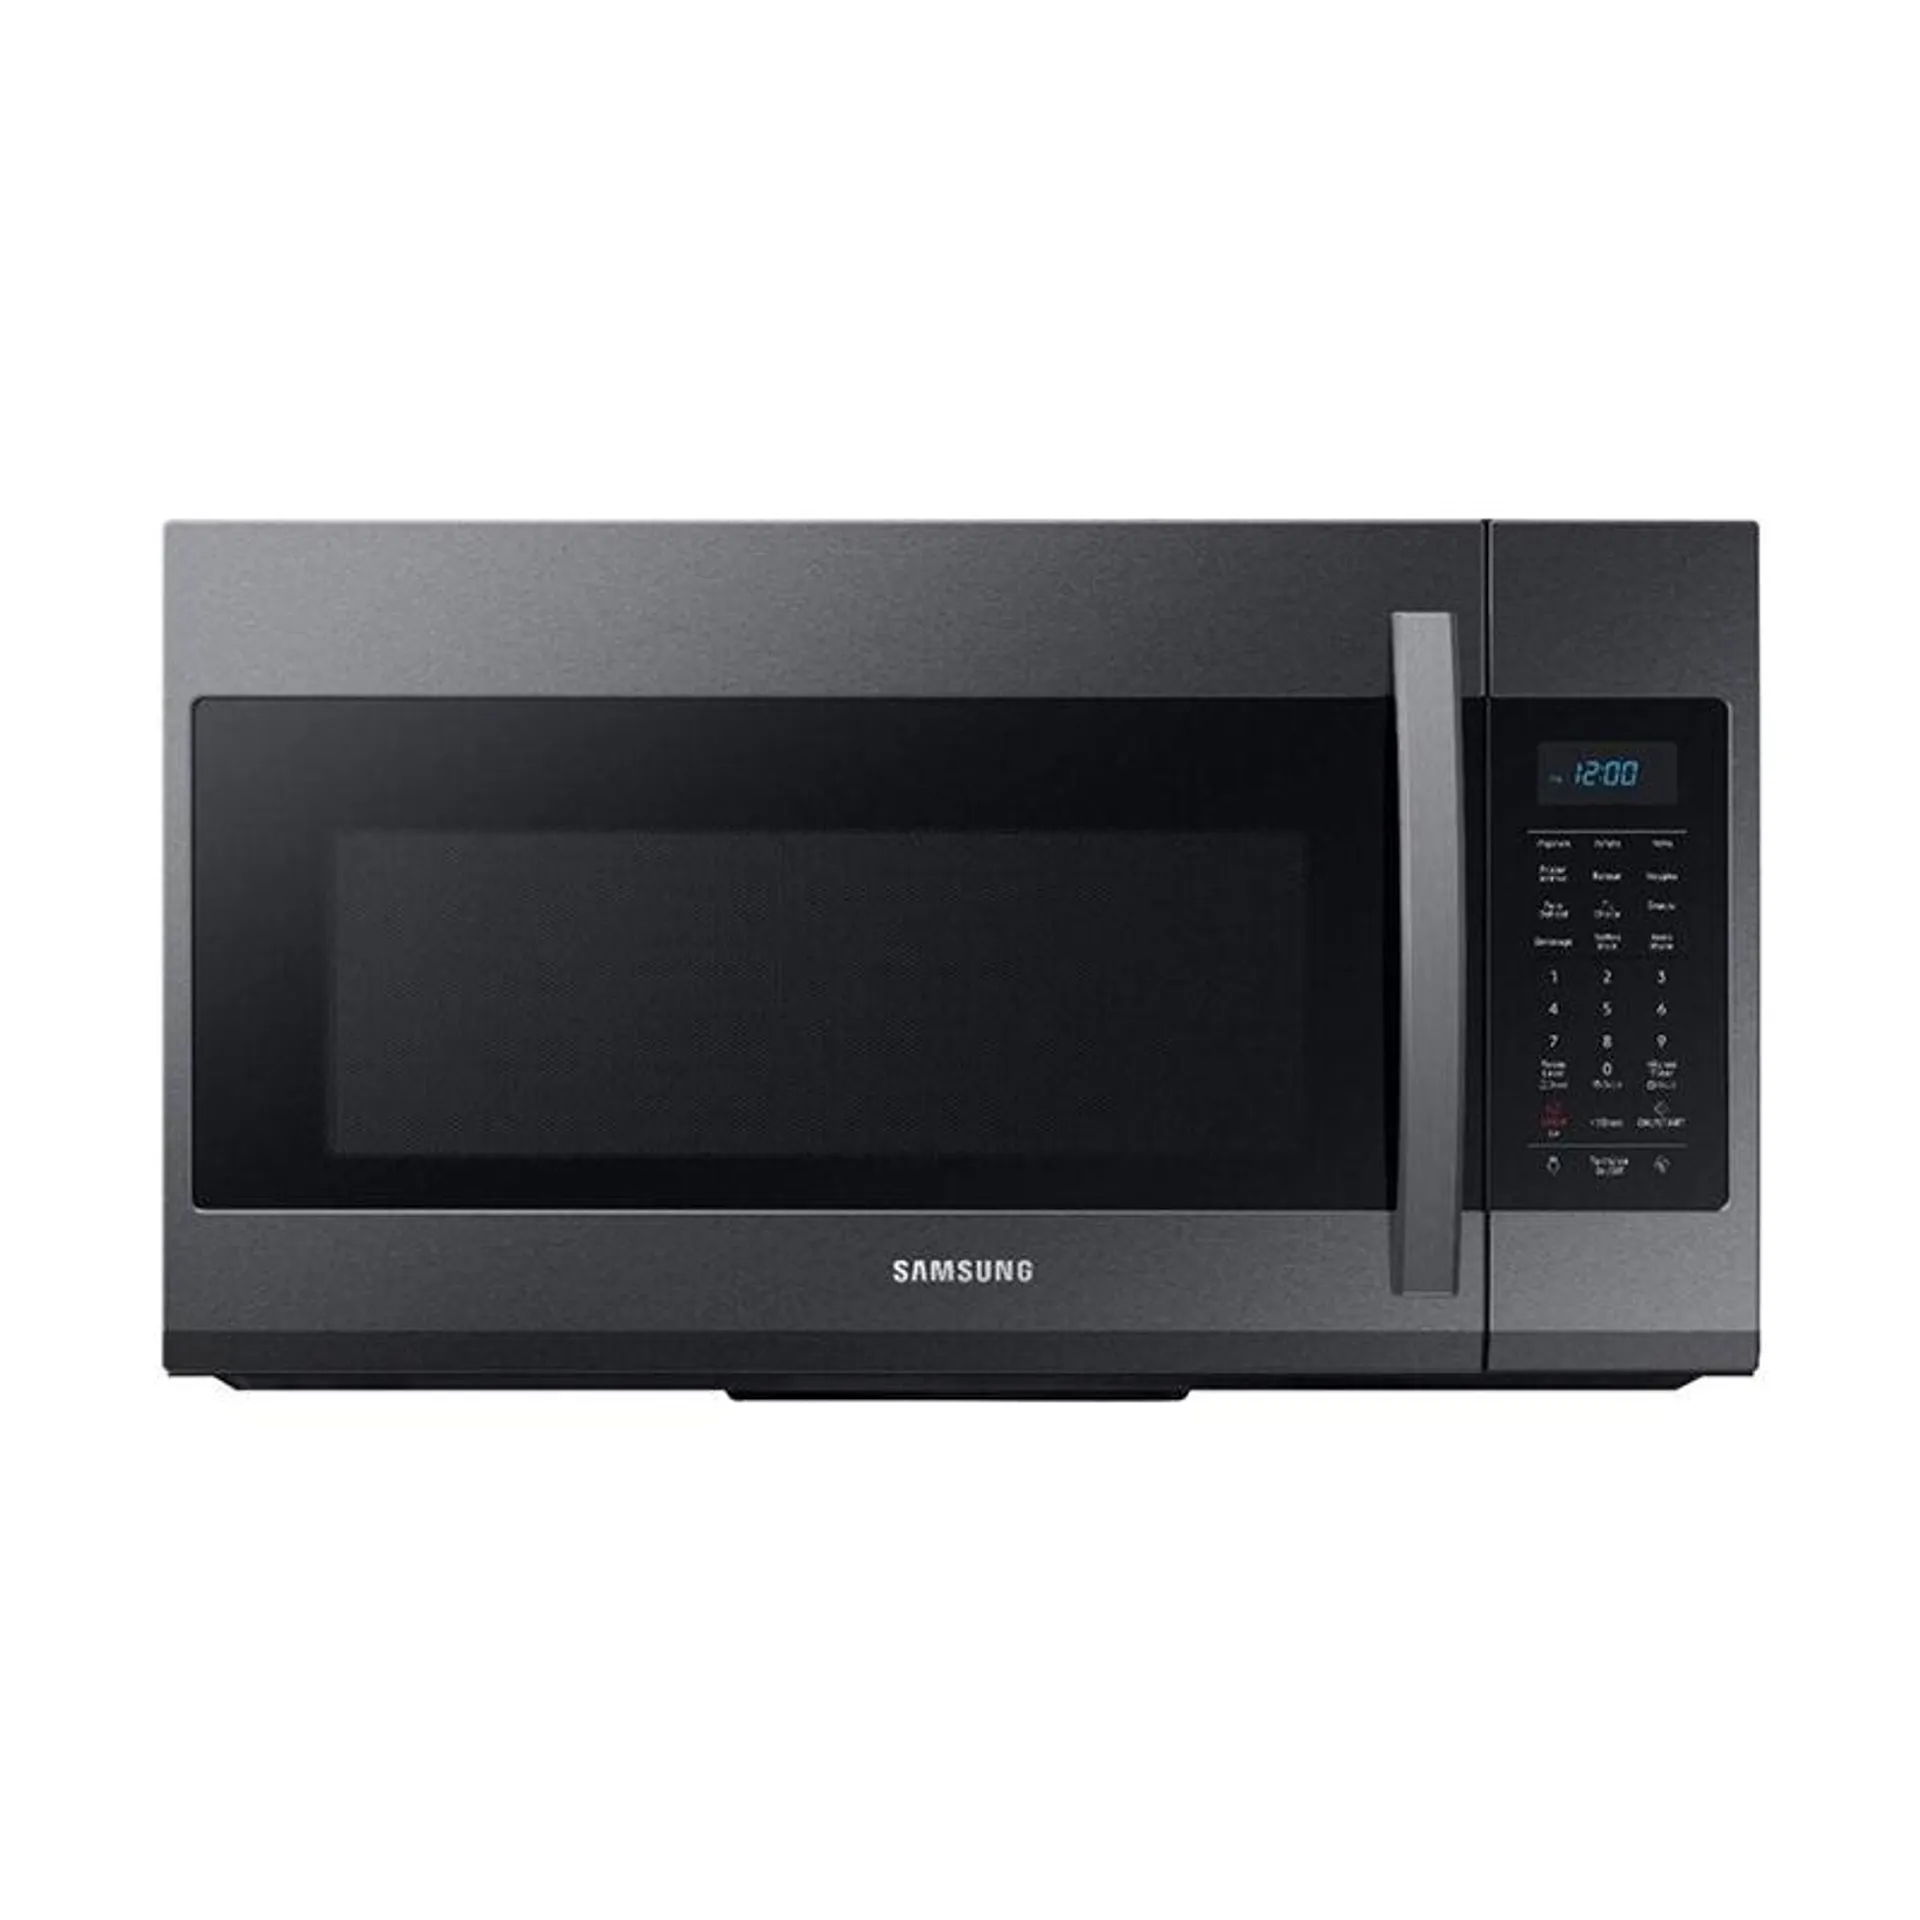 Samsung 30" 1.9 Cu. Ft. Over-the-Range Microwave with 10 Power Levels, 400 CFM & Sensor Cooking Controls - Black Stainless Steel